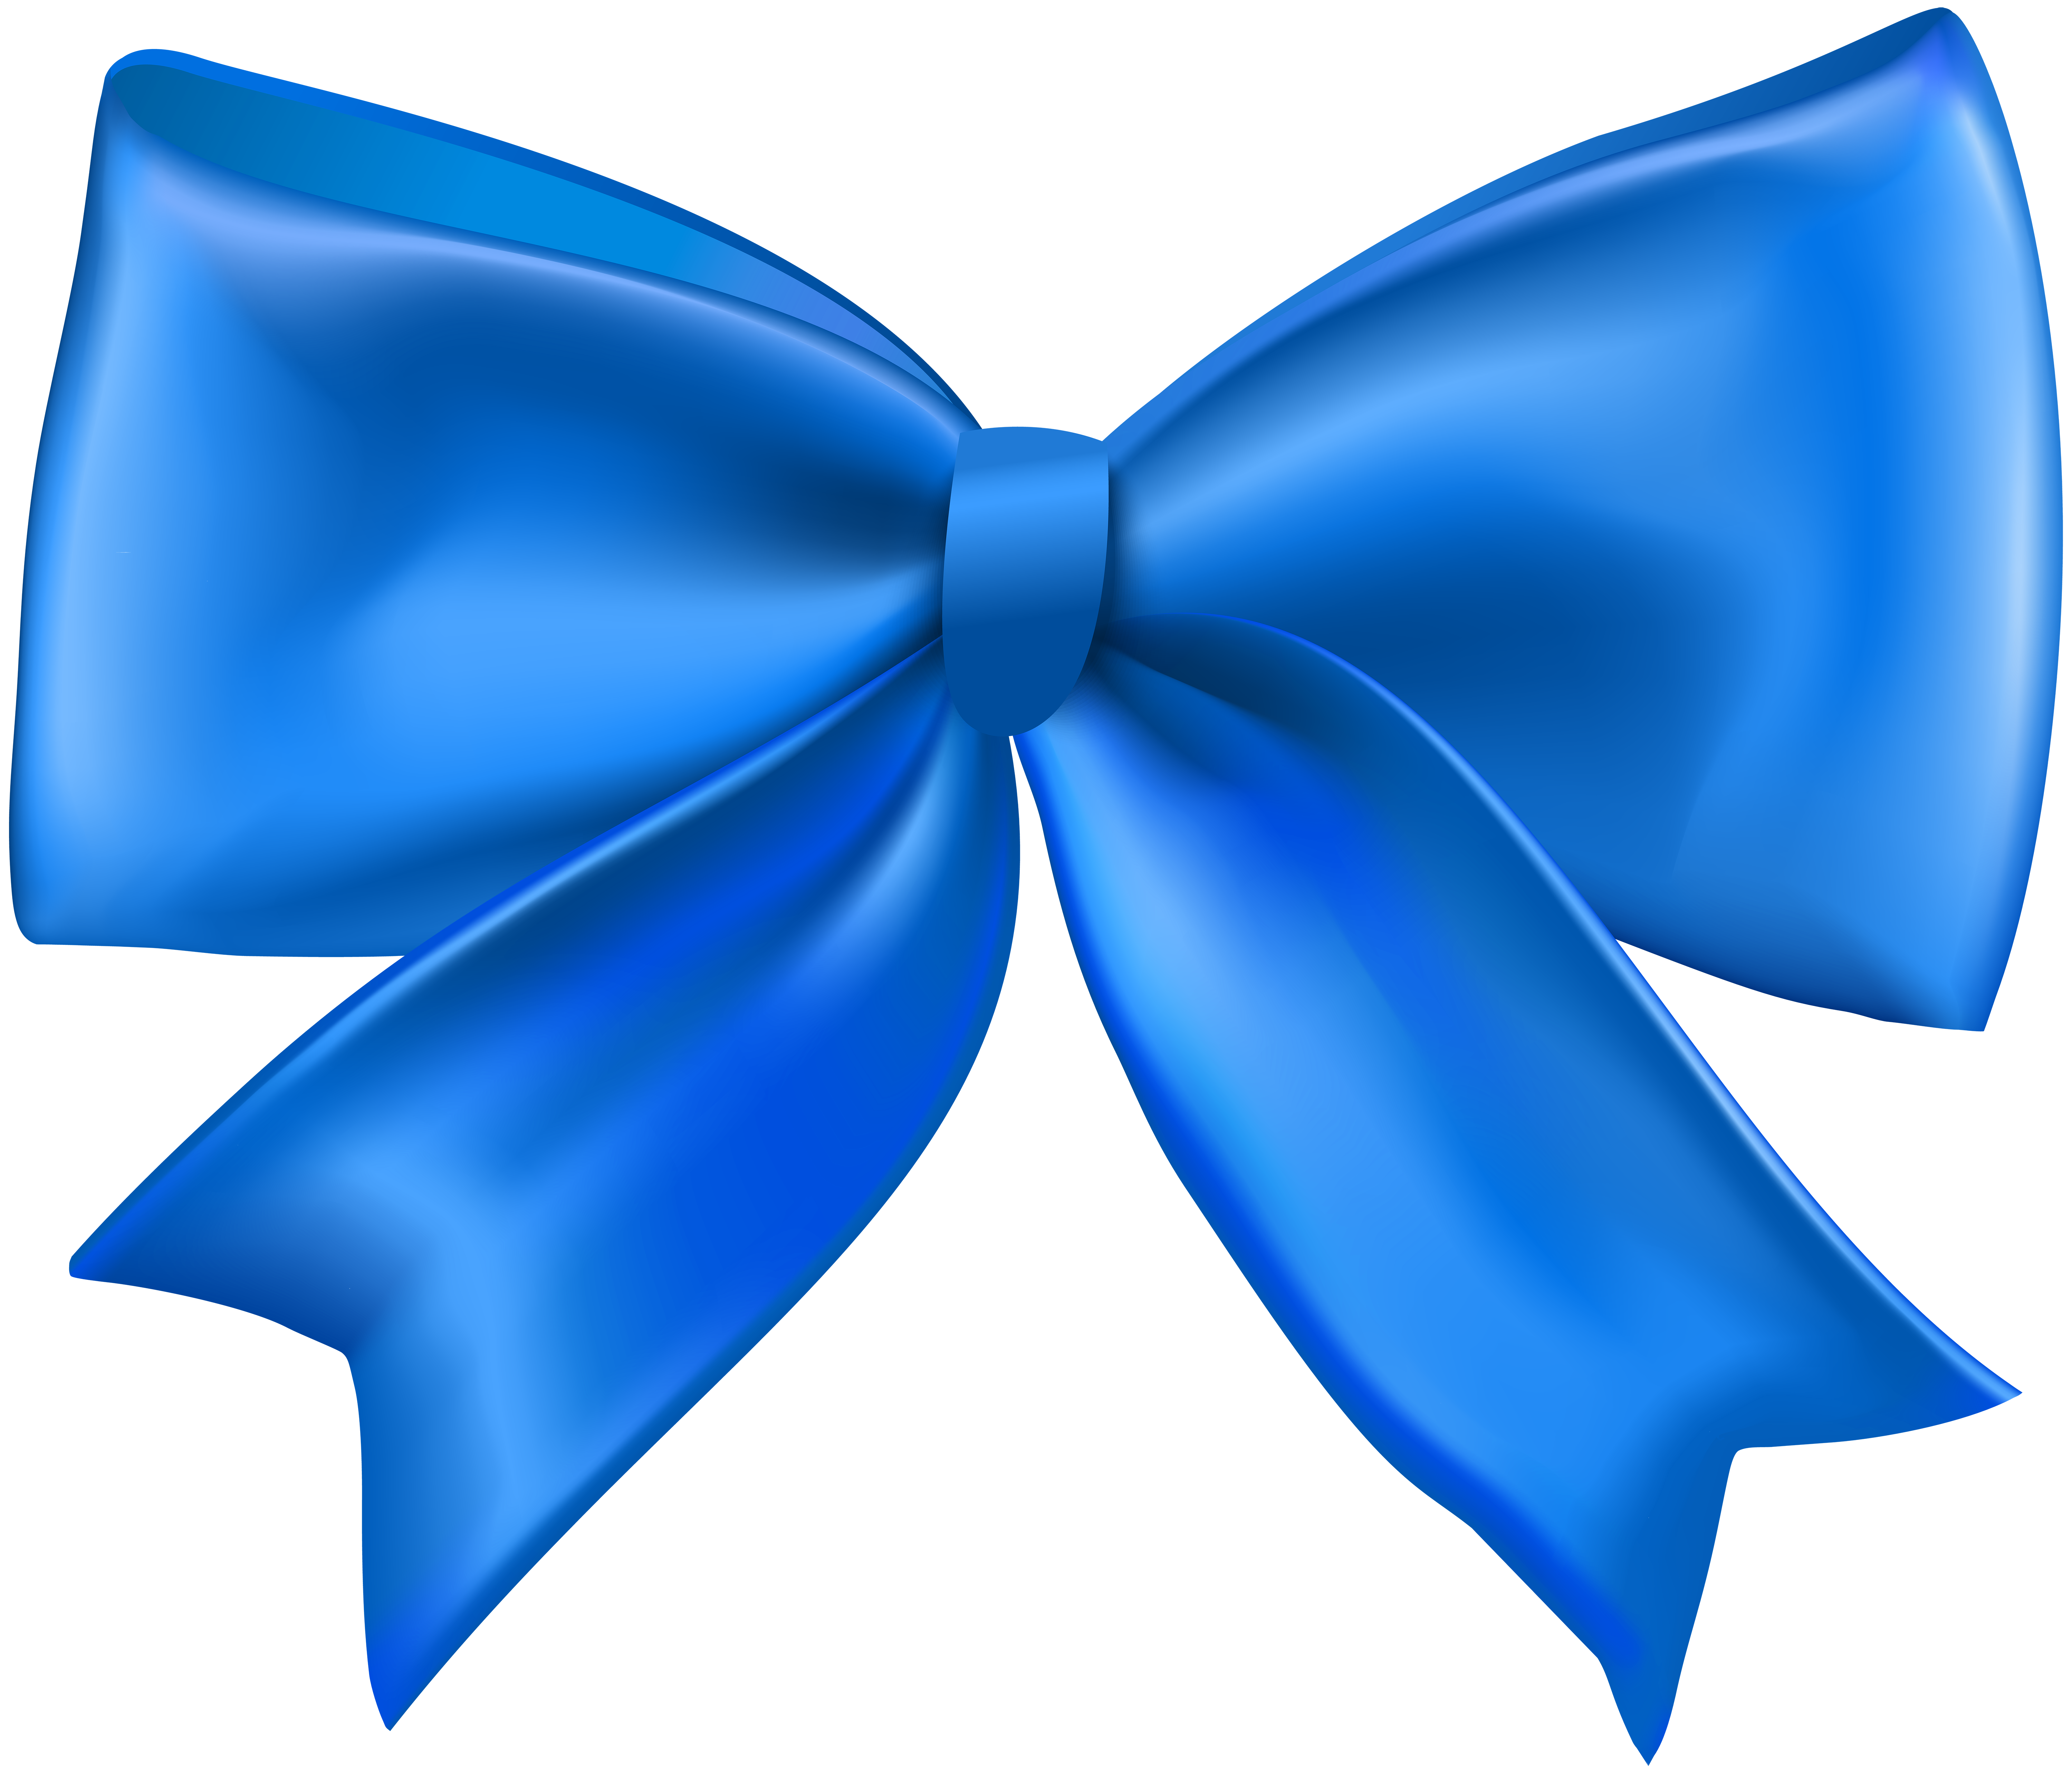 https://gallery.yopriceville.com/var/albums/Free-Clipart-Pictures/Ribbons-and-Banners-PNG/Blue_Bow_PNG_Transparent_Clip_Art_Image.png?m=1629811709